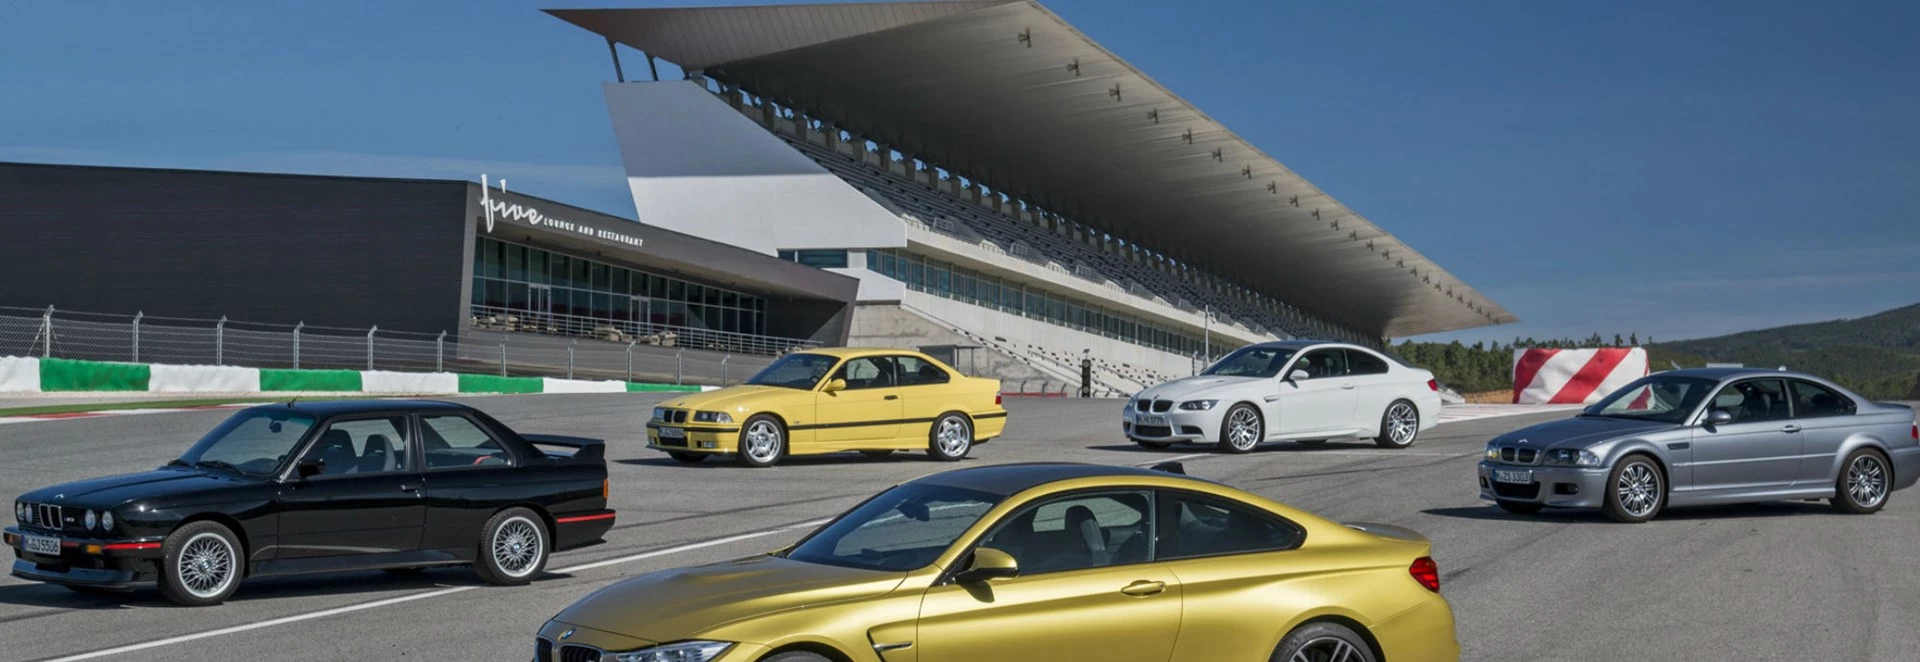 30 years of the BMW M3: The greatest special edition M3s 